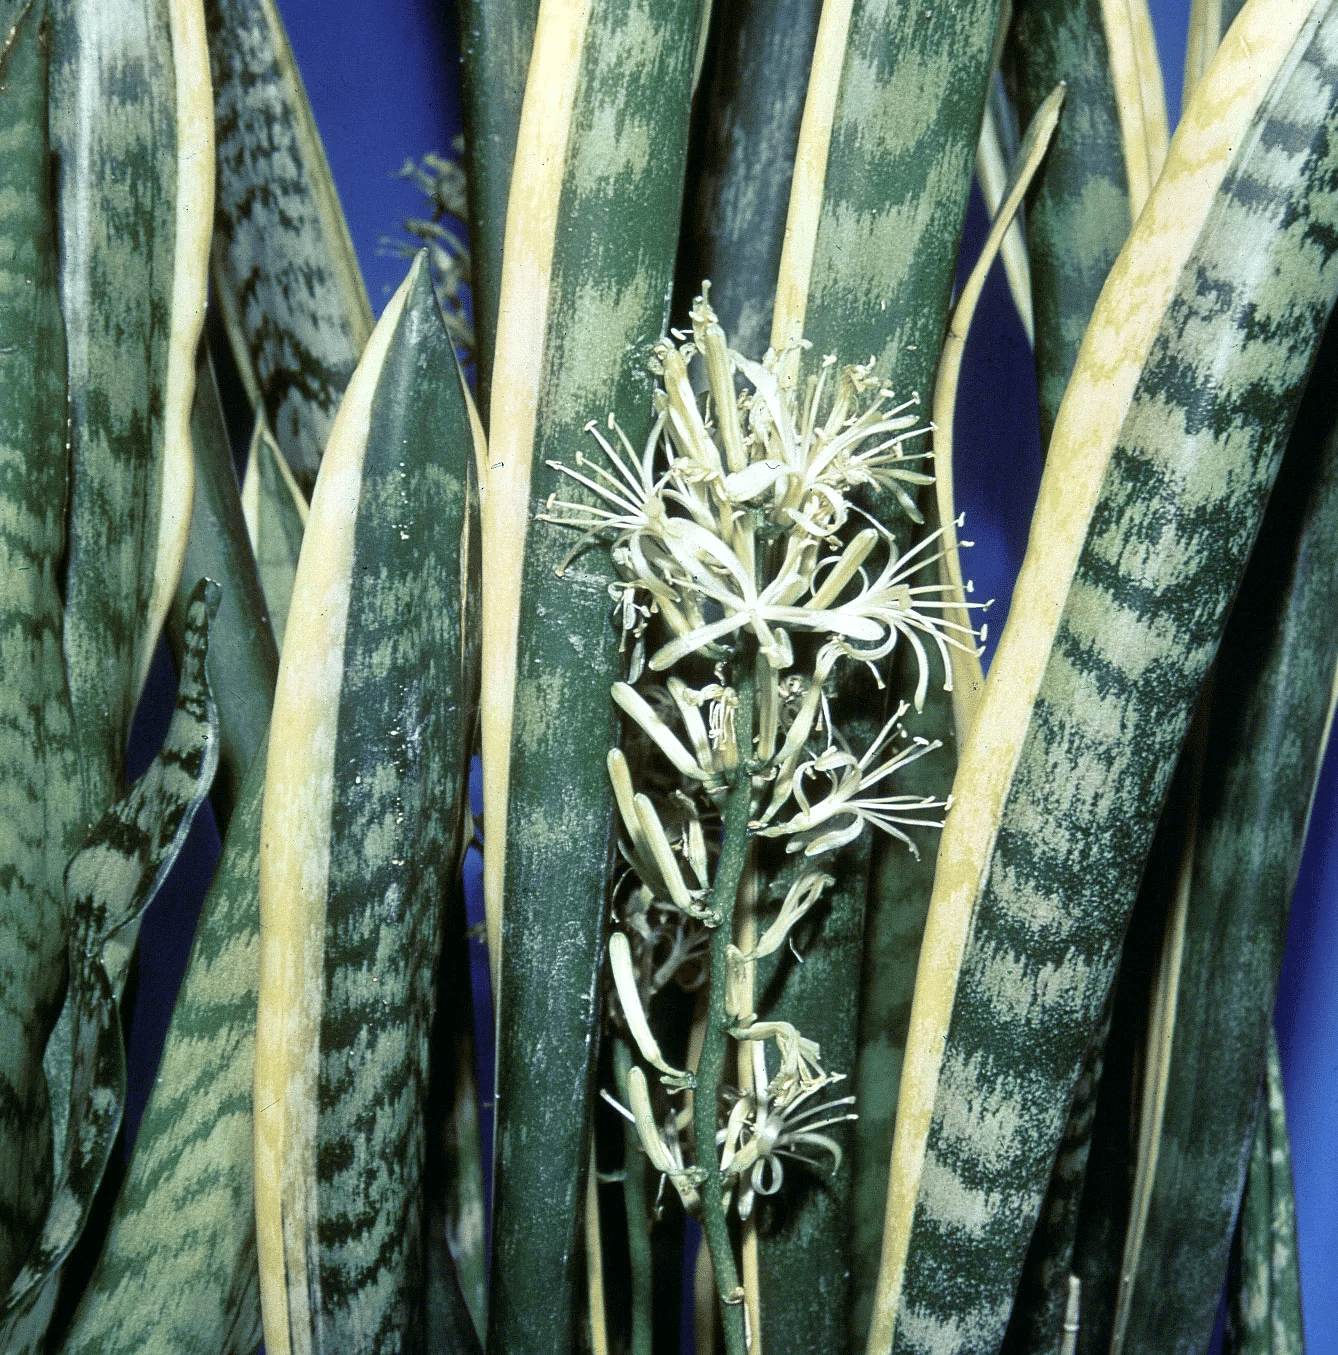 Mother in law's tongue with its long flower stalk and pointed leaves